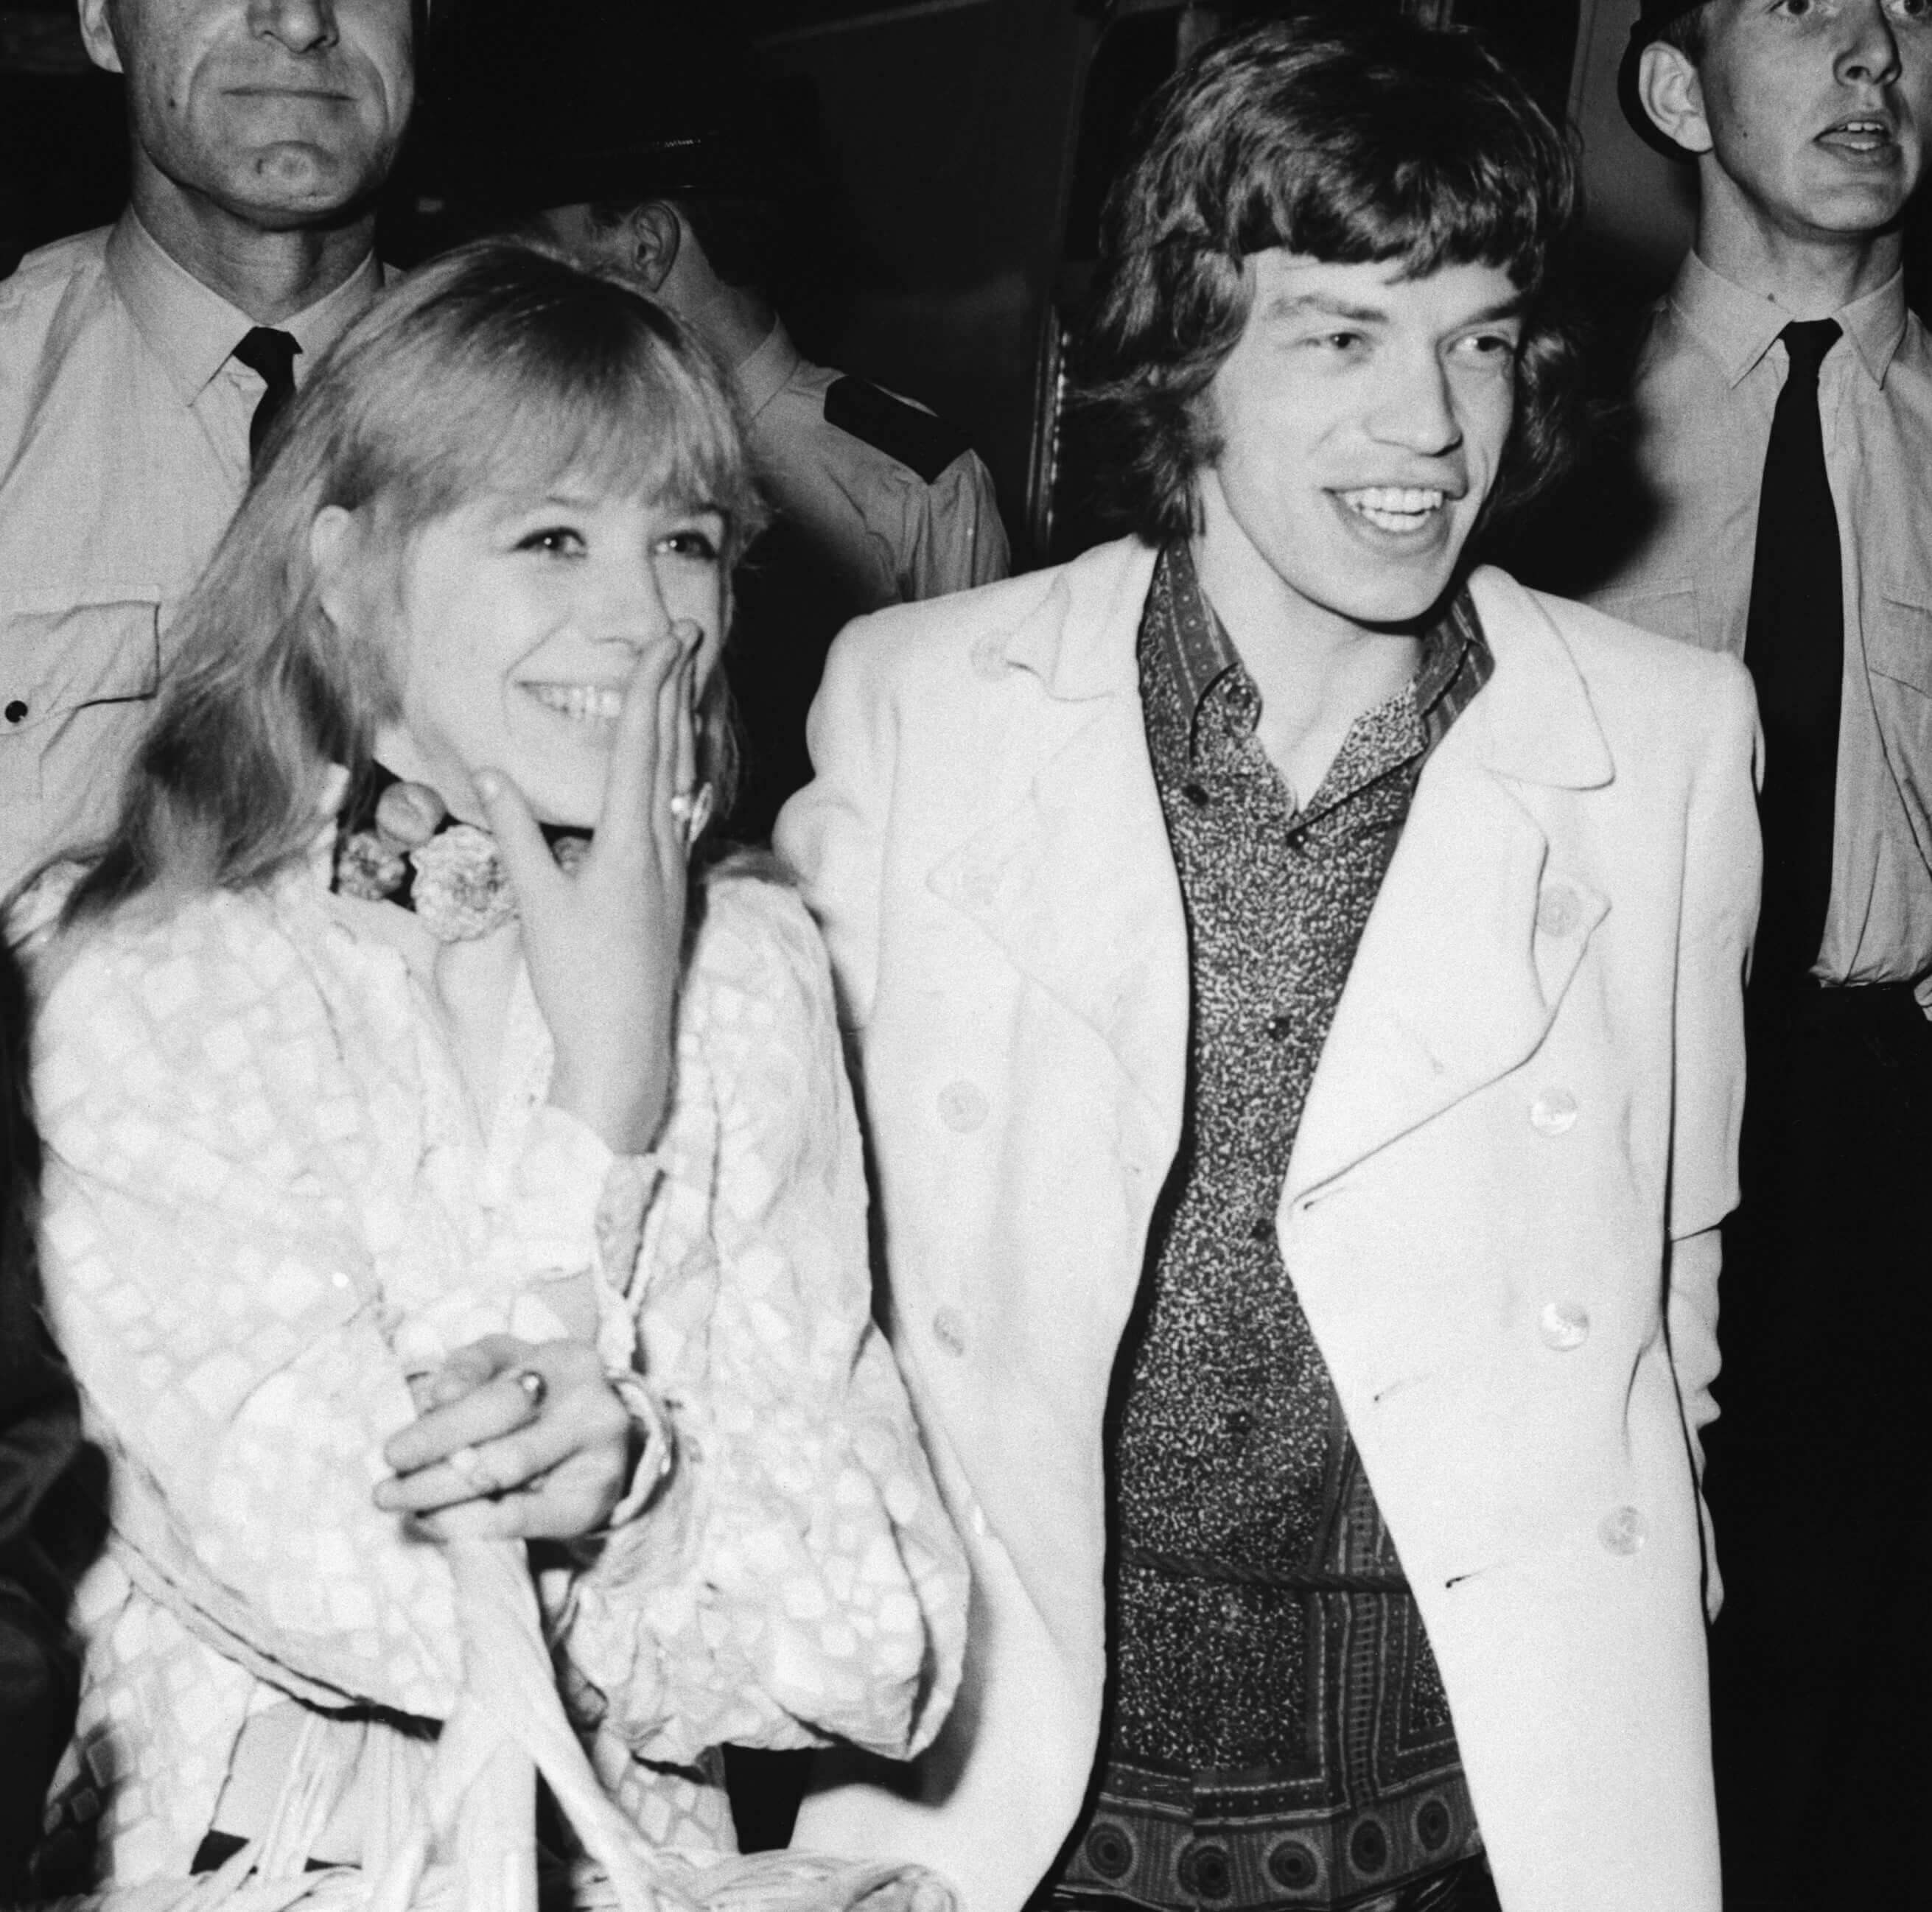 Marianne Faithfull and The Rolling Stones' Mick Jagger